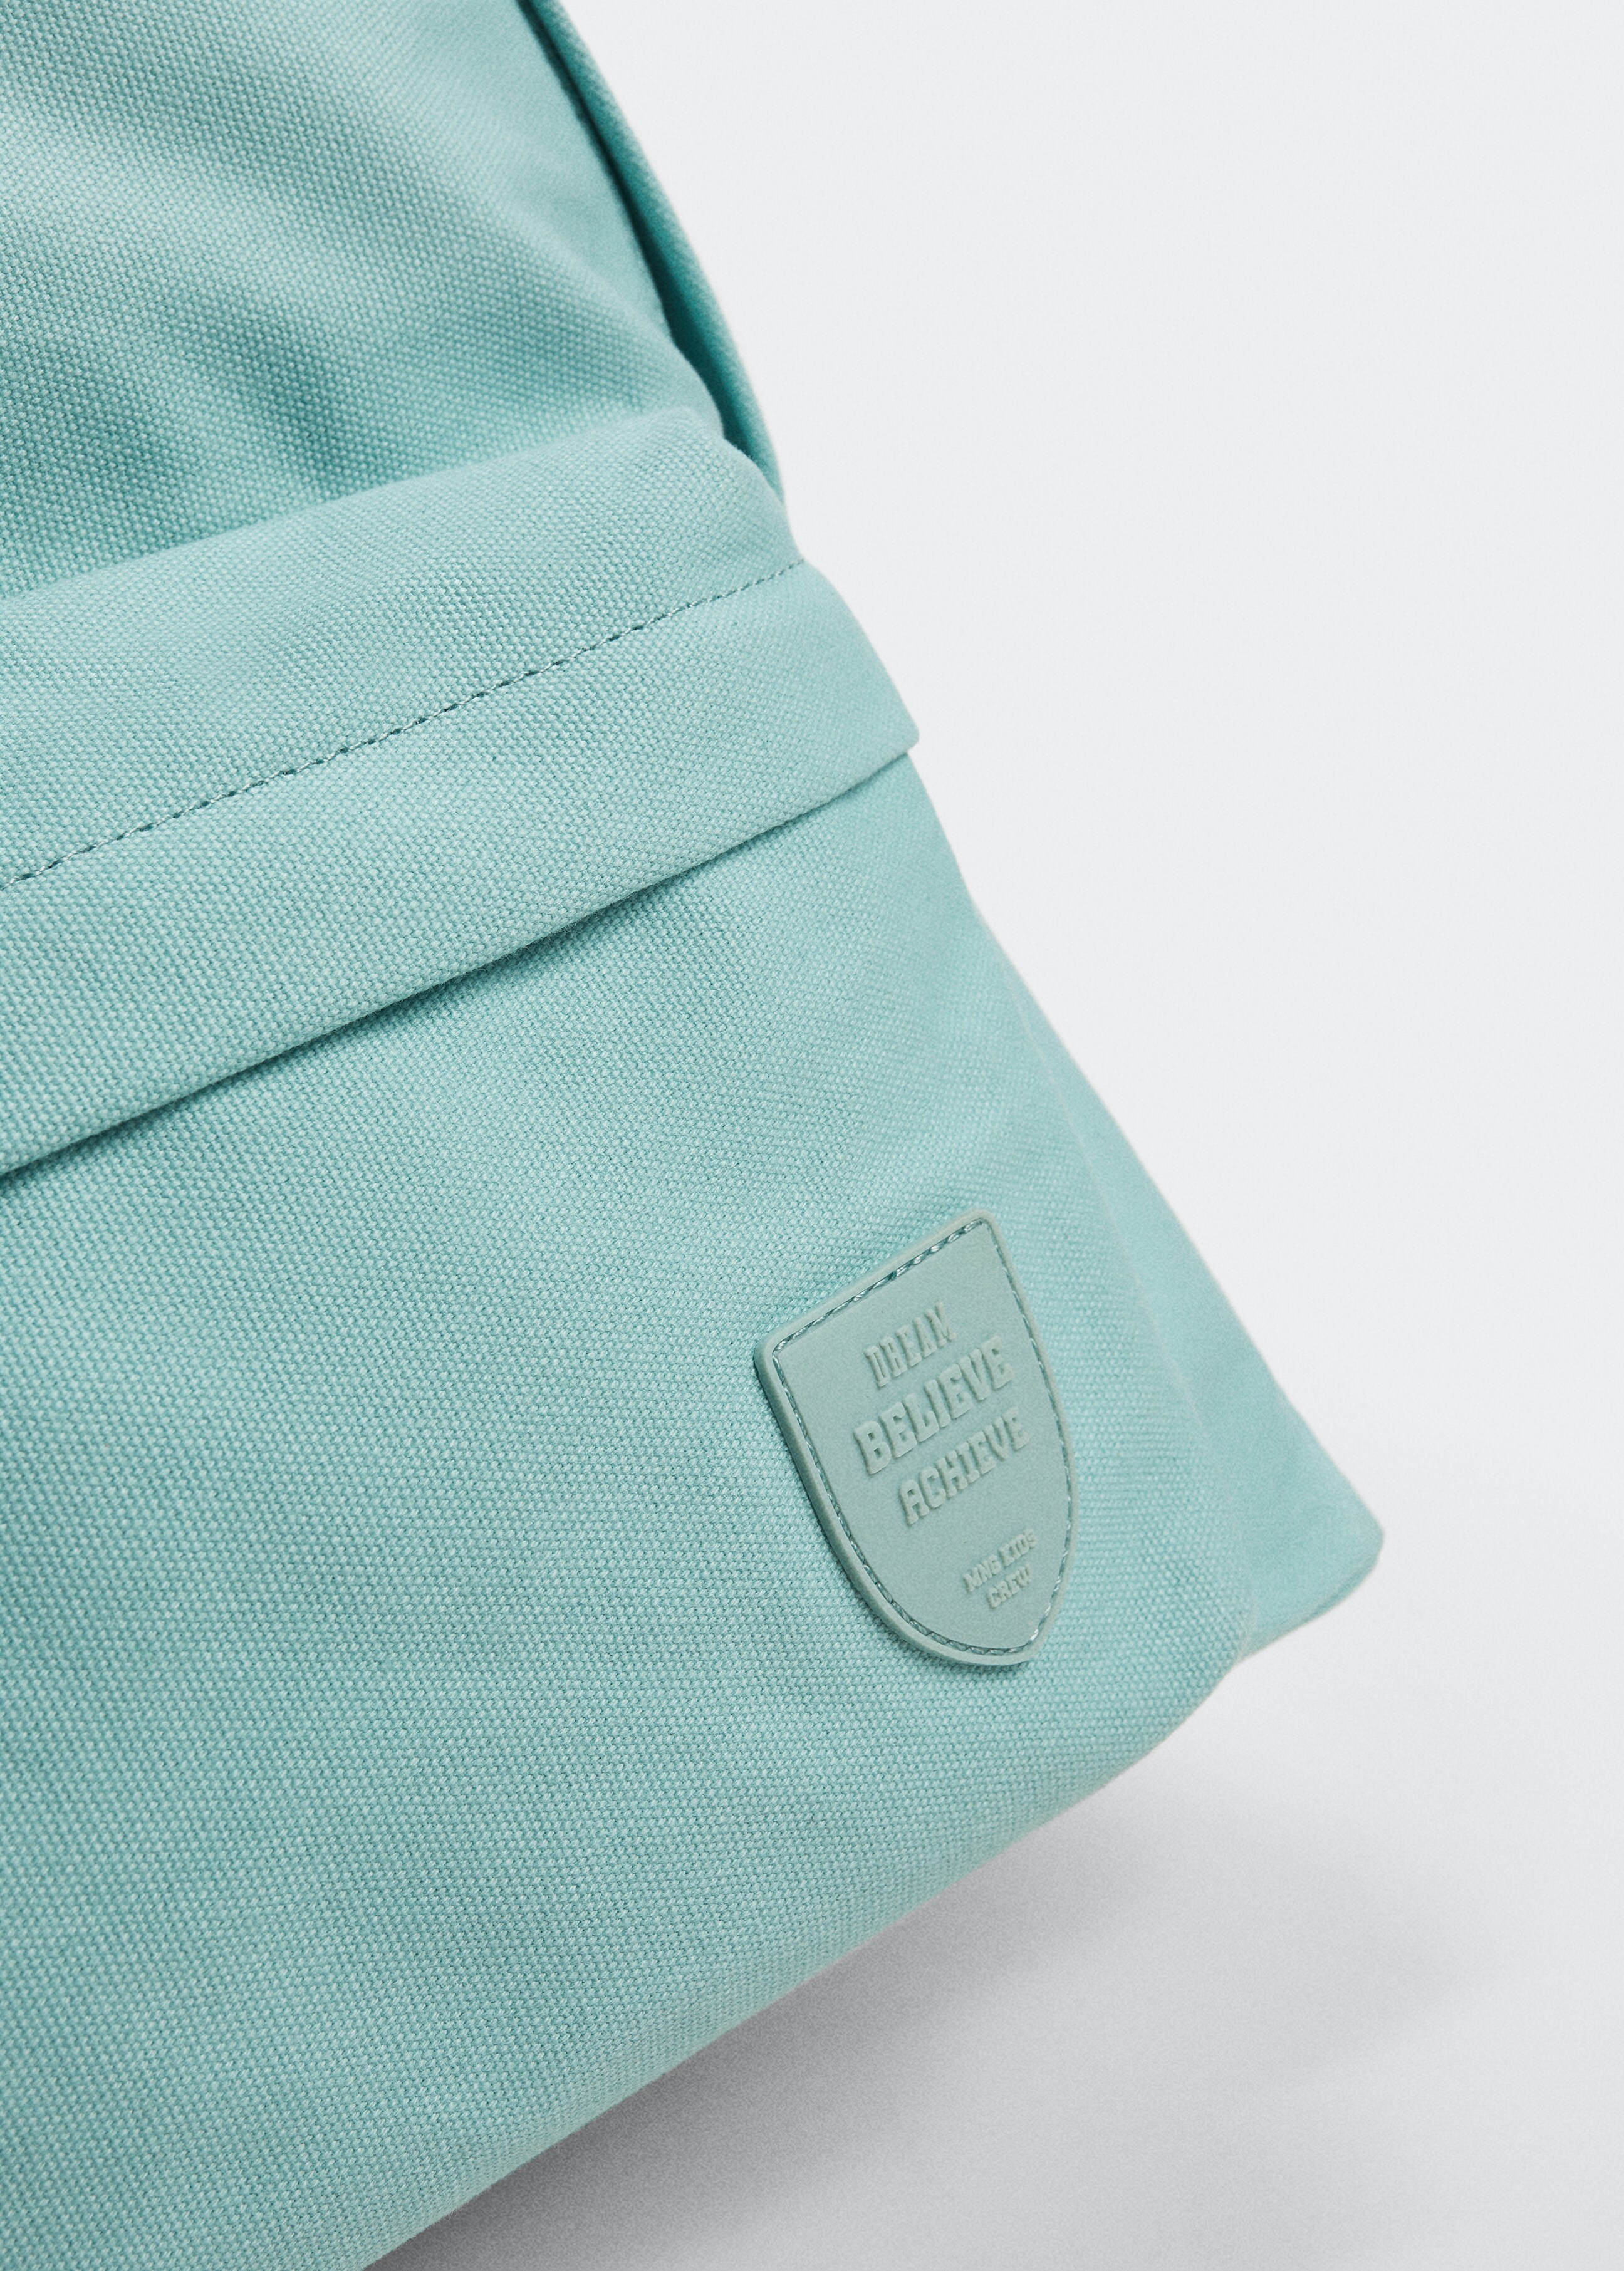 Cotton bag - Details of the article 2